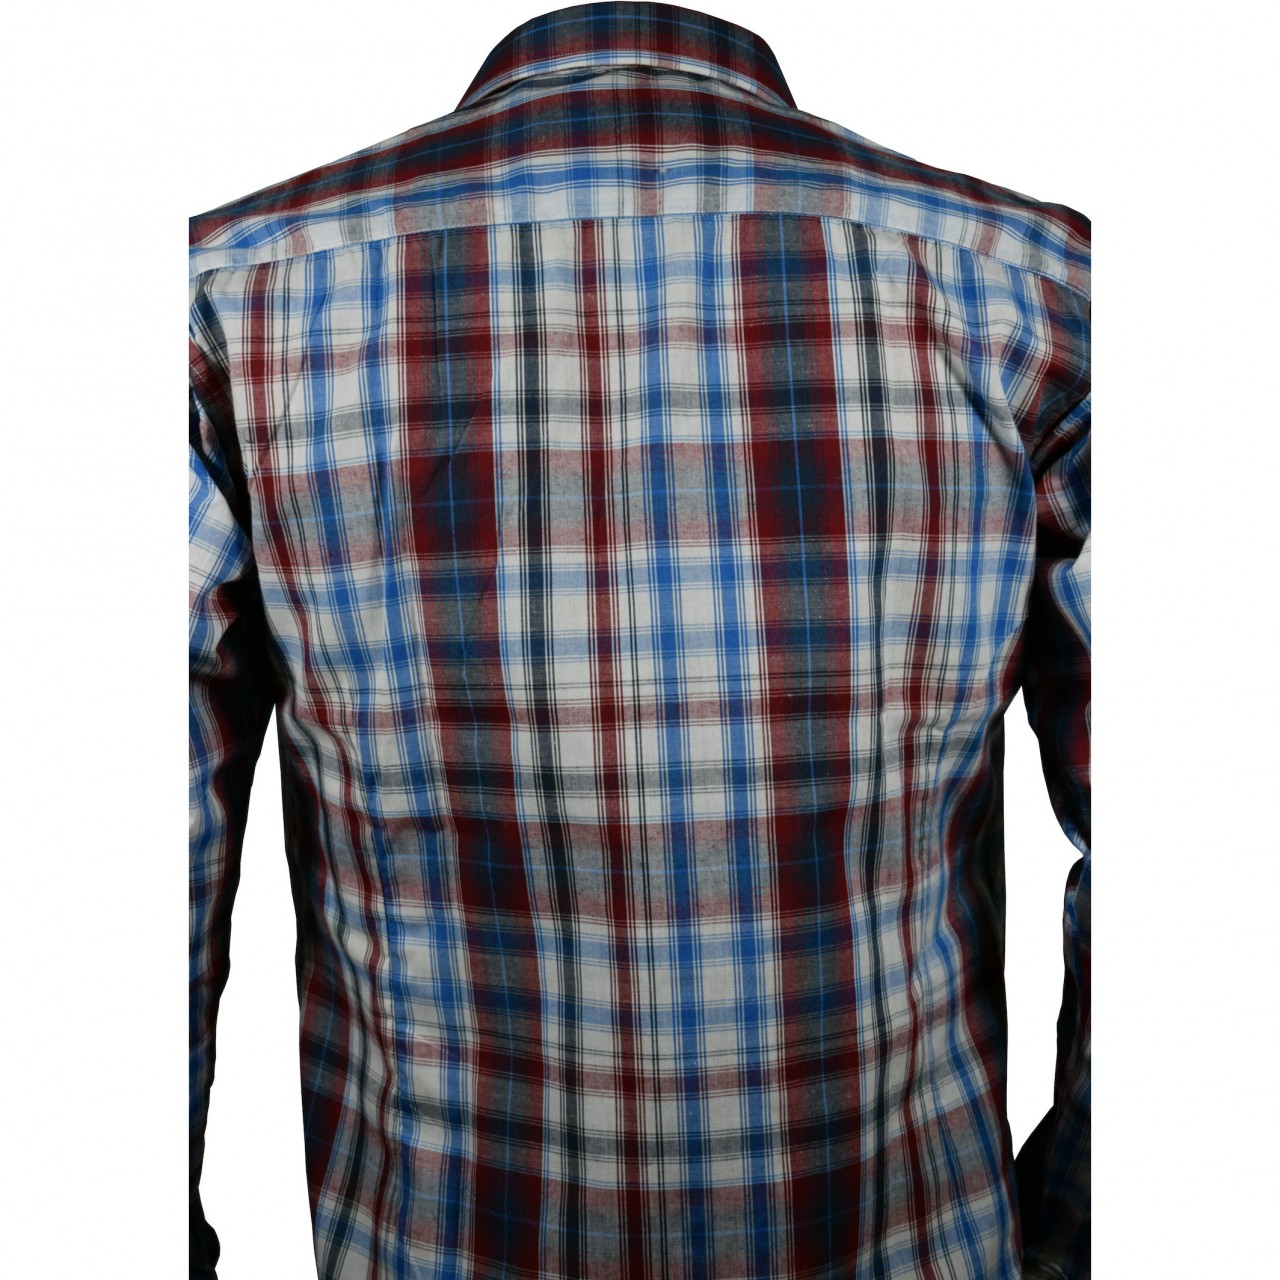 Slim Fit Shirts for Summer For Men in Multi-Color Check